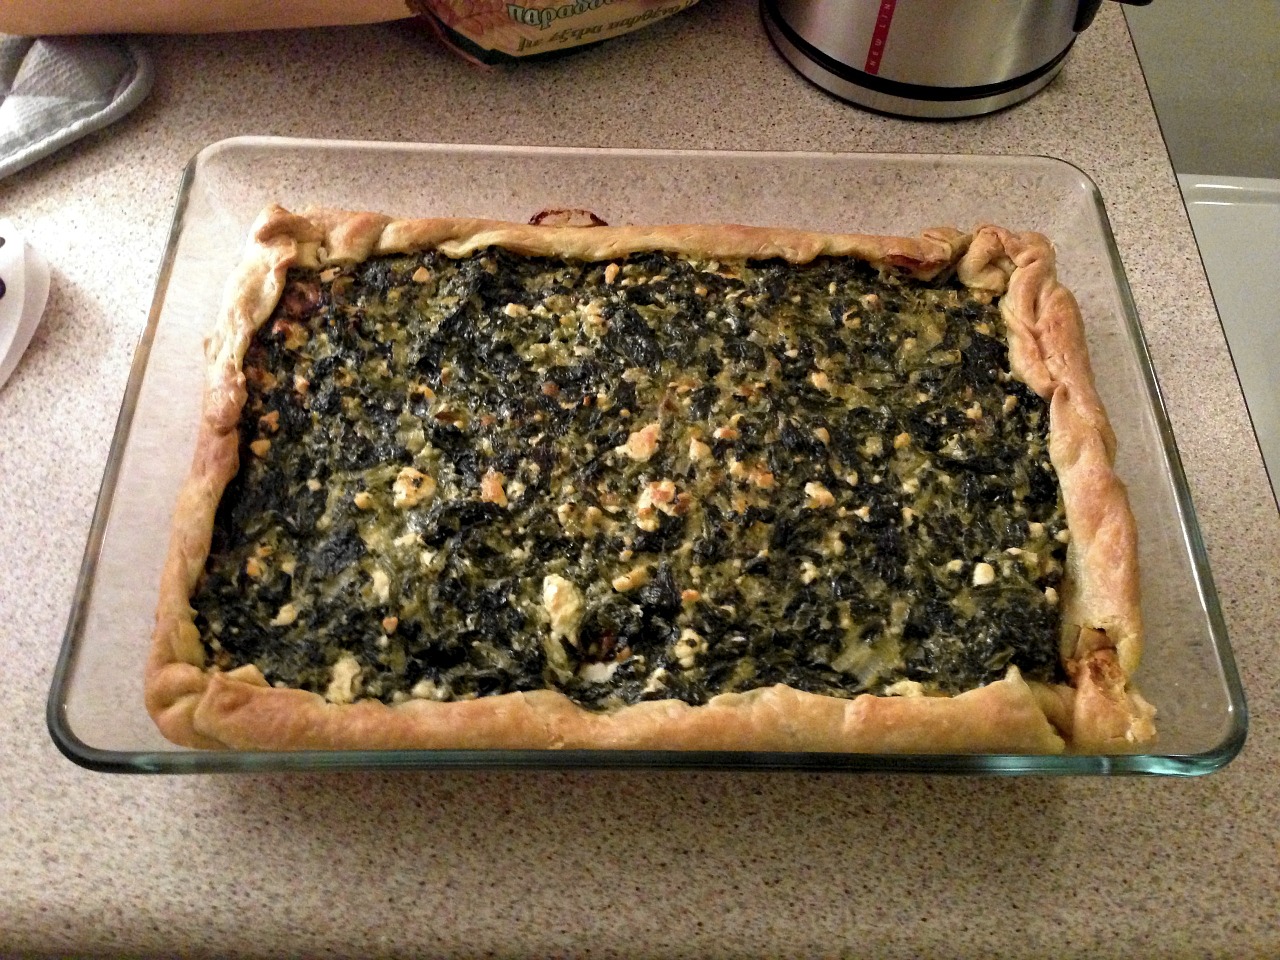 Bosnian Pita (phyllo pie) with Spinach Filling